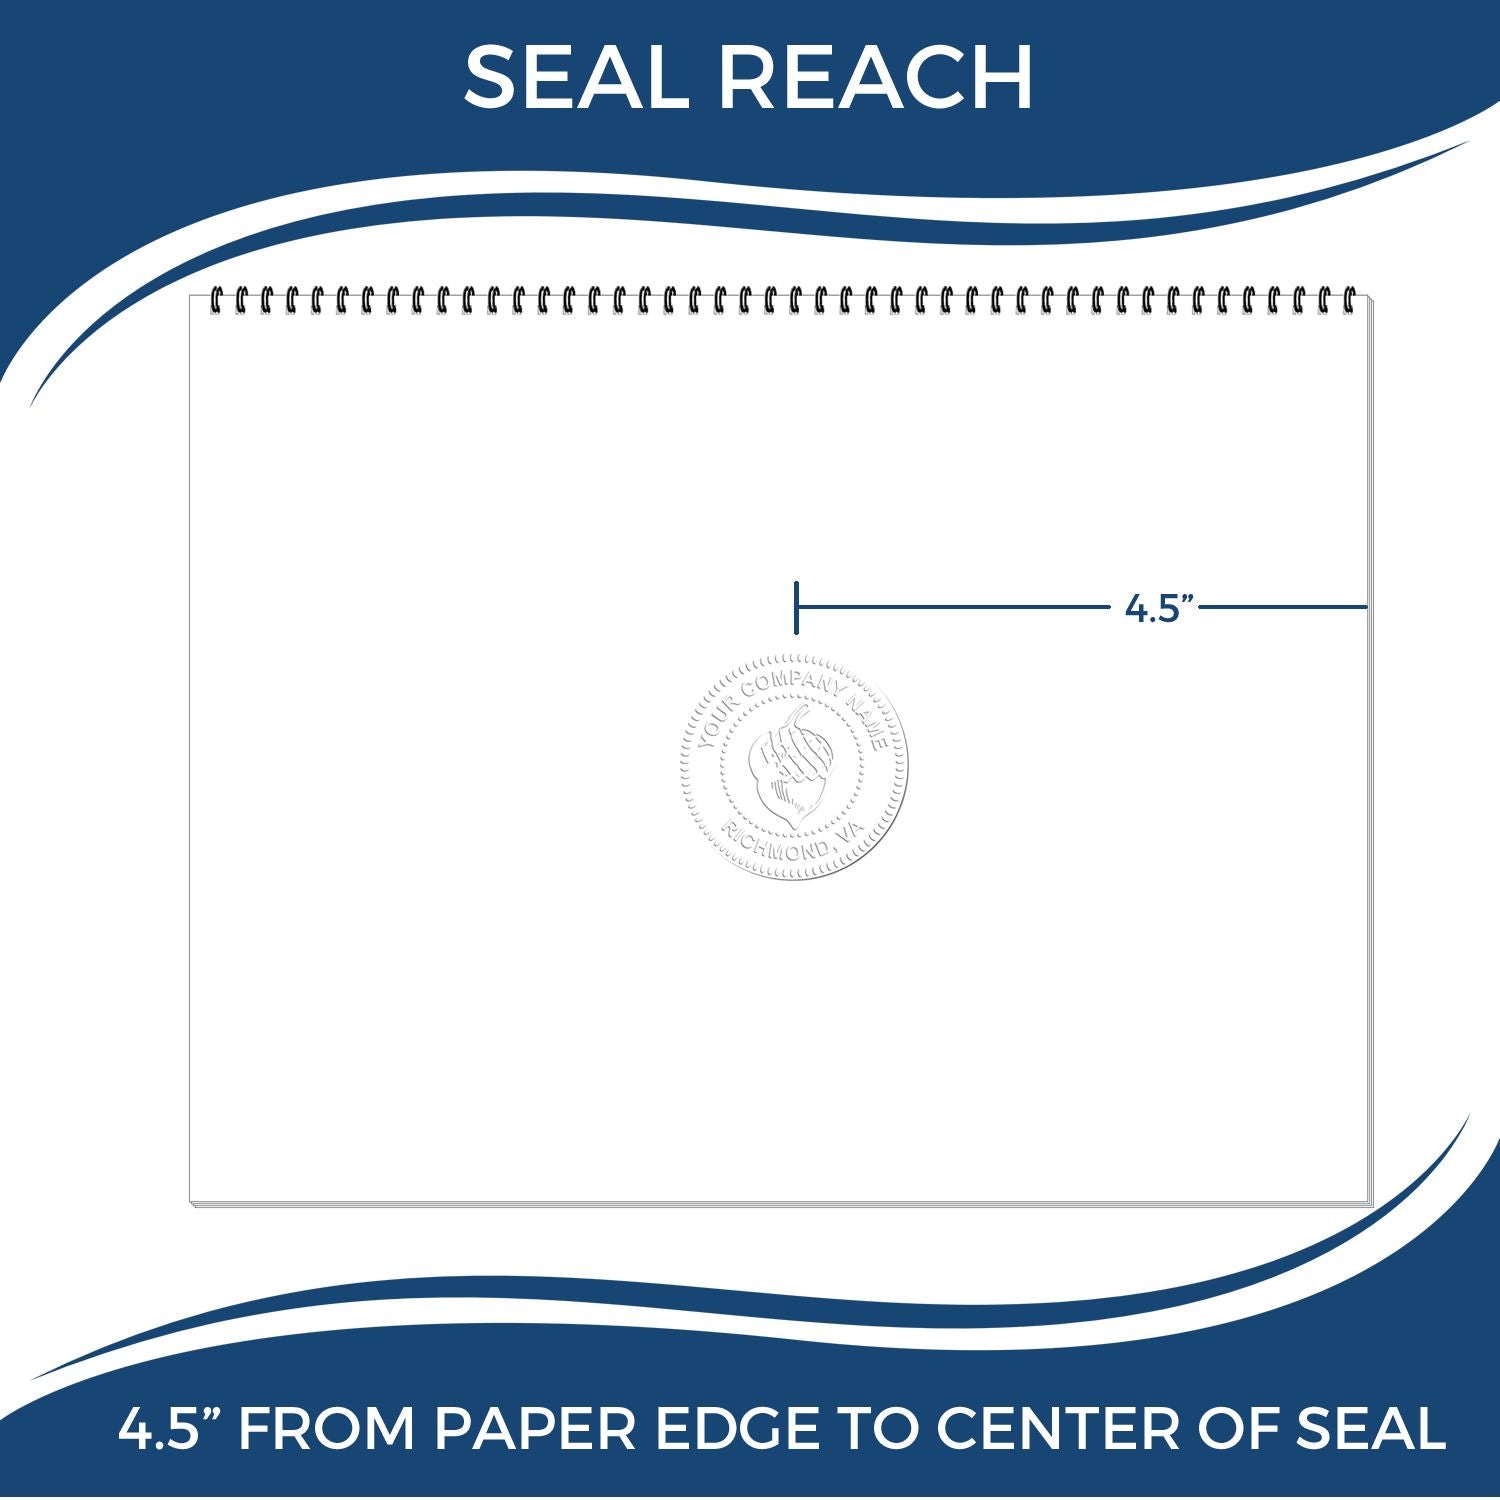 An infographic showing the seal reach which is represented by a ruler and a miniature seal image of the State of Iowa Extended Long Reach Engineer Seal